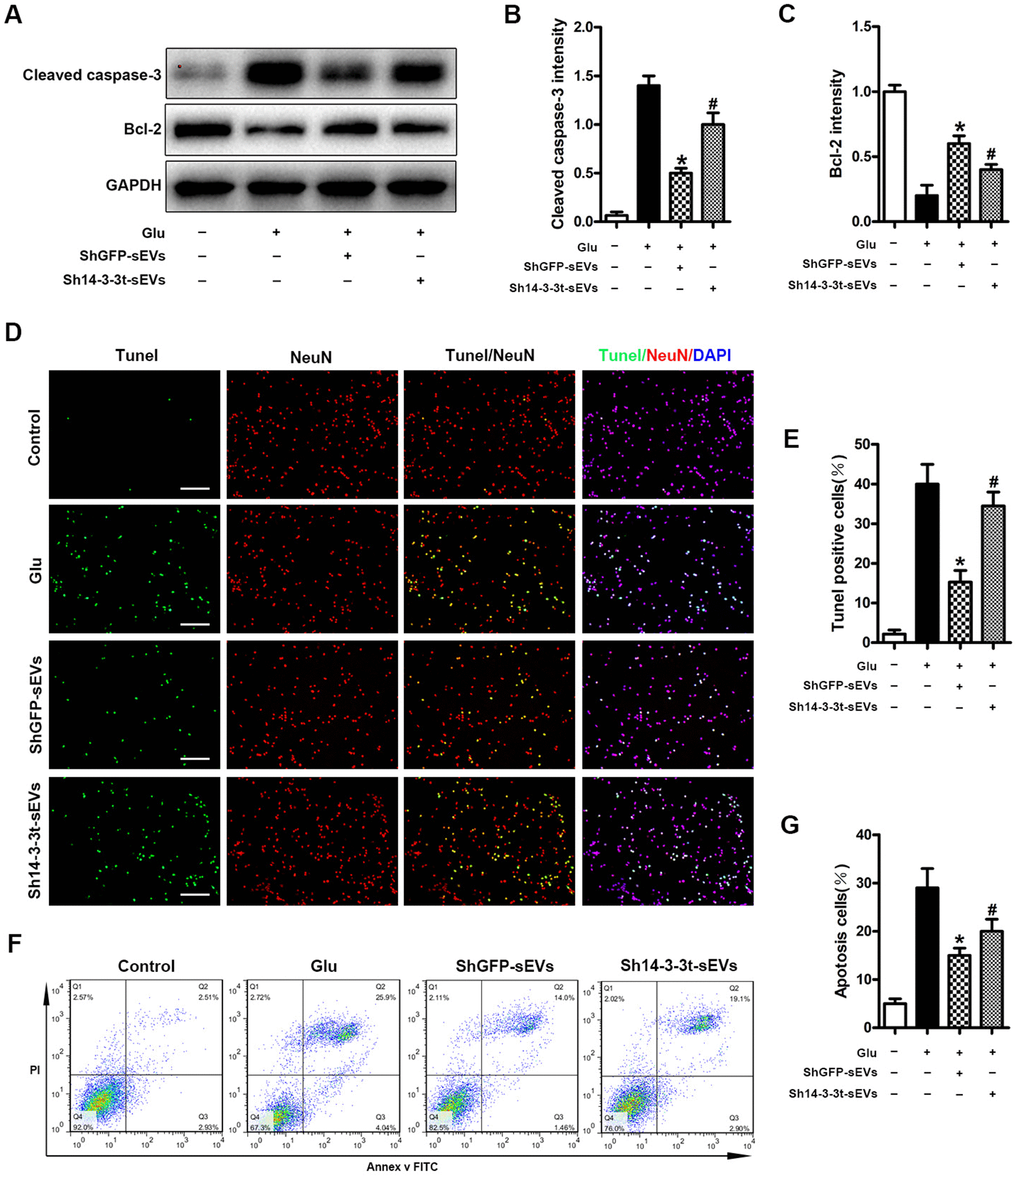 Knockout of 14-3-3t attenuates the anti-apoptotic effect of NSC-sEVs in neuronal cells. (A) Western blot analysis of changes in neuronal apoptosis-related proteins. (B, C) Semi-quantitative detection of relative expression levels of apoptosis-related proteins, normalized to GAPDH. (D) TUNEL detection of neuronal apoptosis. TUNEL-positive apoptotic cells (red). Nuclear staining using DAPI (blue). Scale bar = 100um. (E) Quantitative estimation of the proportion of apoptotic cells in each of the three experimental groups. (F) Annexin V/FITC/PI double staining and flow cytometry was used to detect neuronal apoptosis induced by Glu with or without NSC-sEVs. (G) Quantitative results of NSC-sEVs treatment and non-treatment of apoptotic neurons. * p 